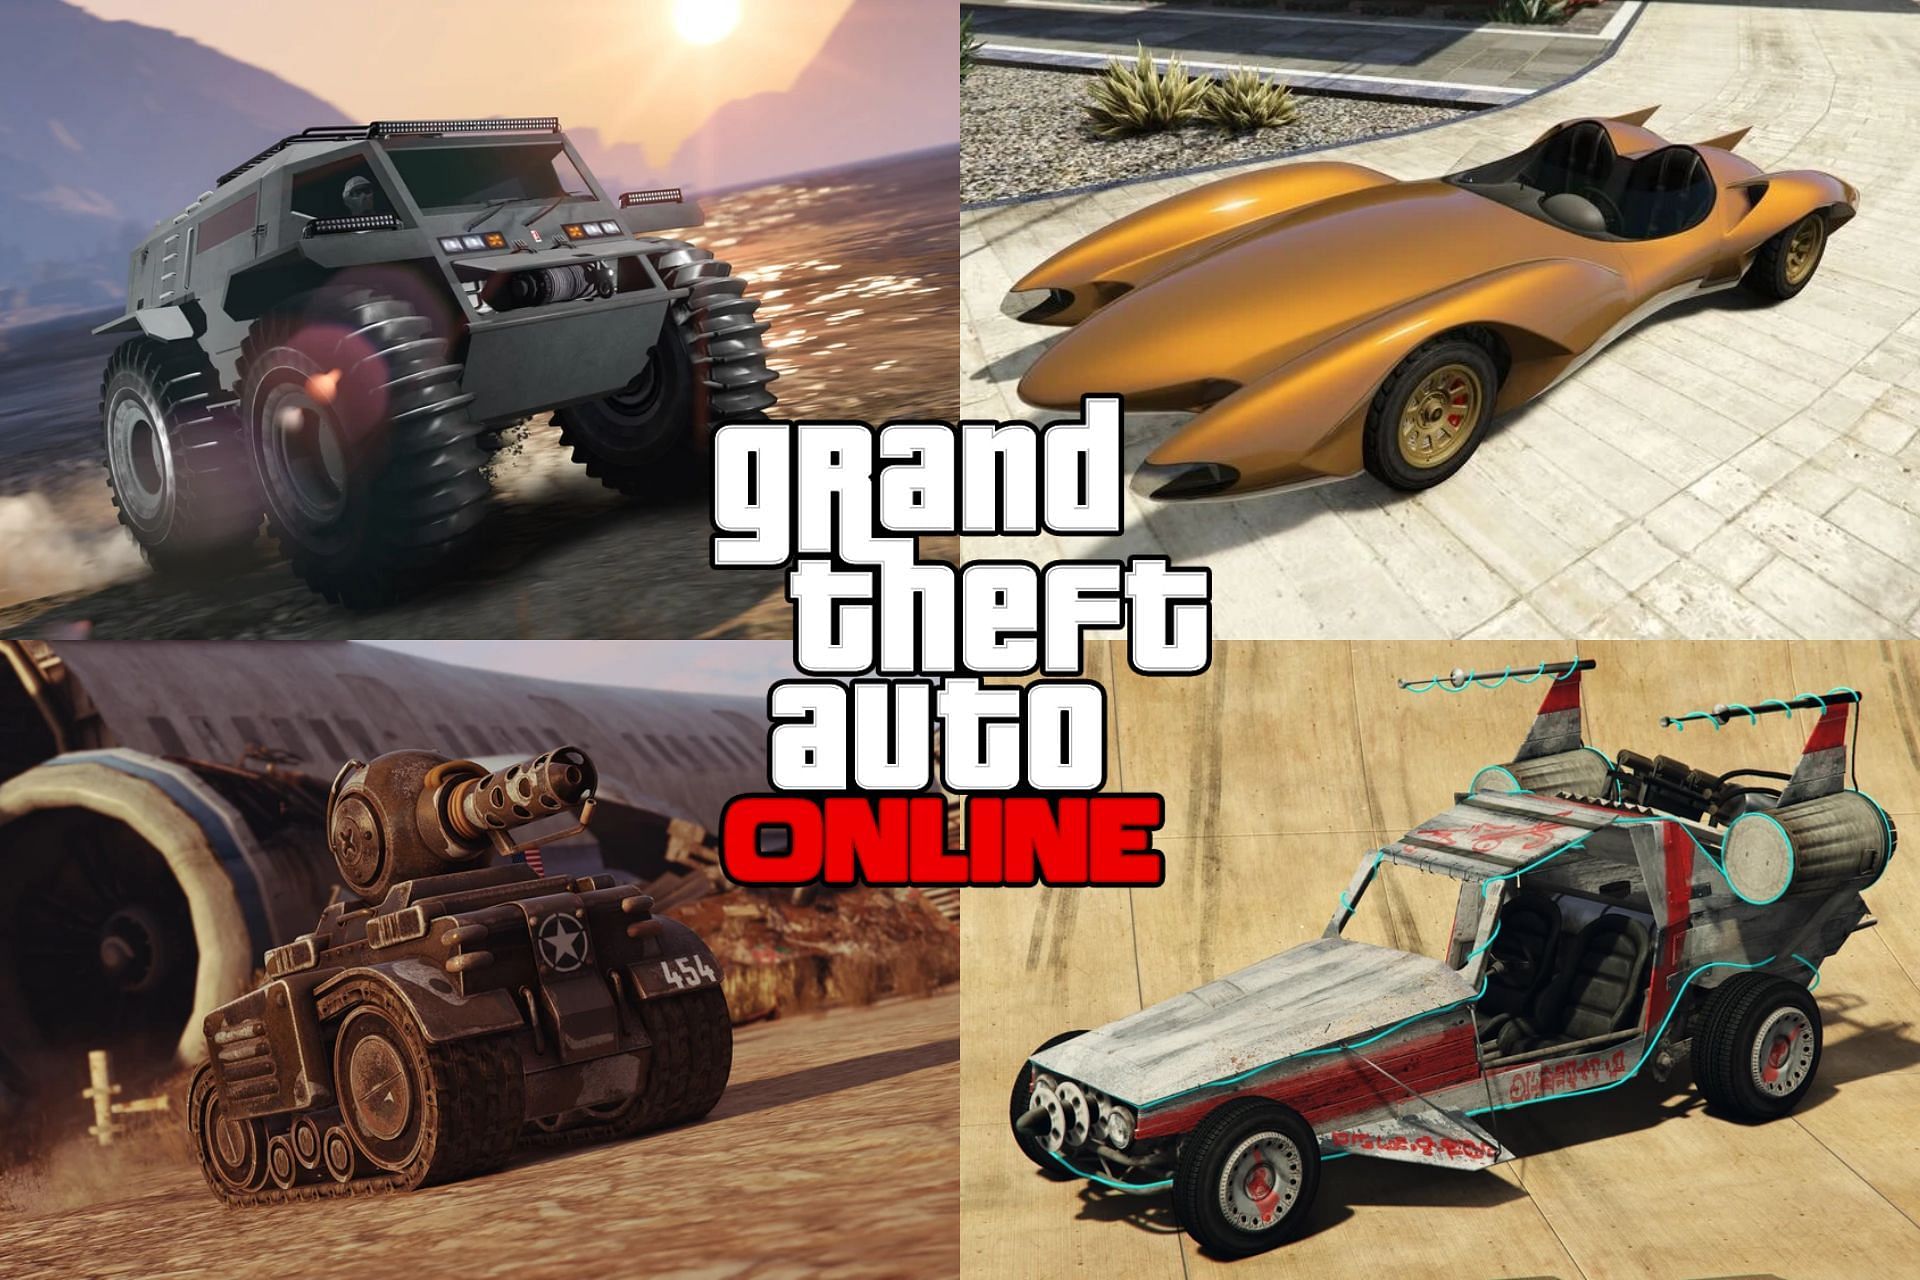 Players can look at the strange cars available in GTA Online (Images via GTA Fandom)